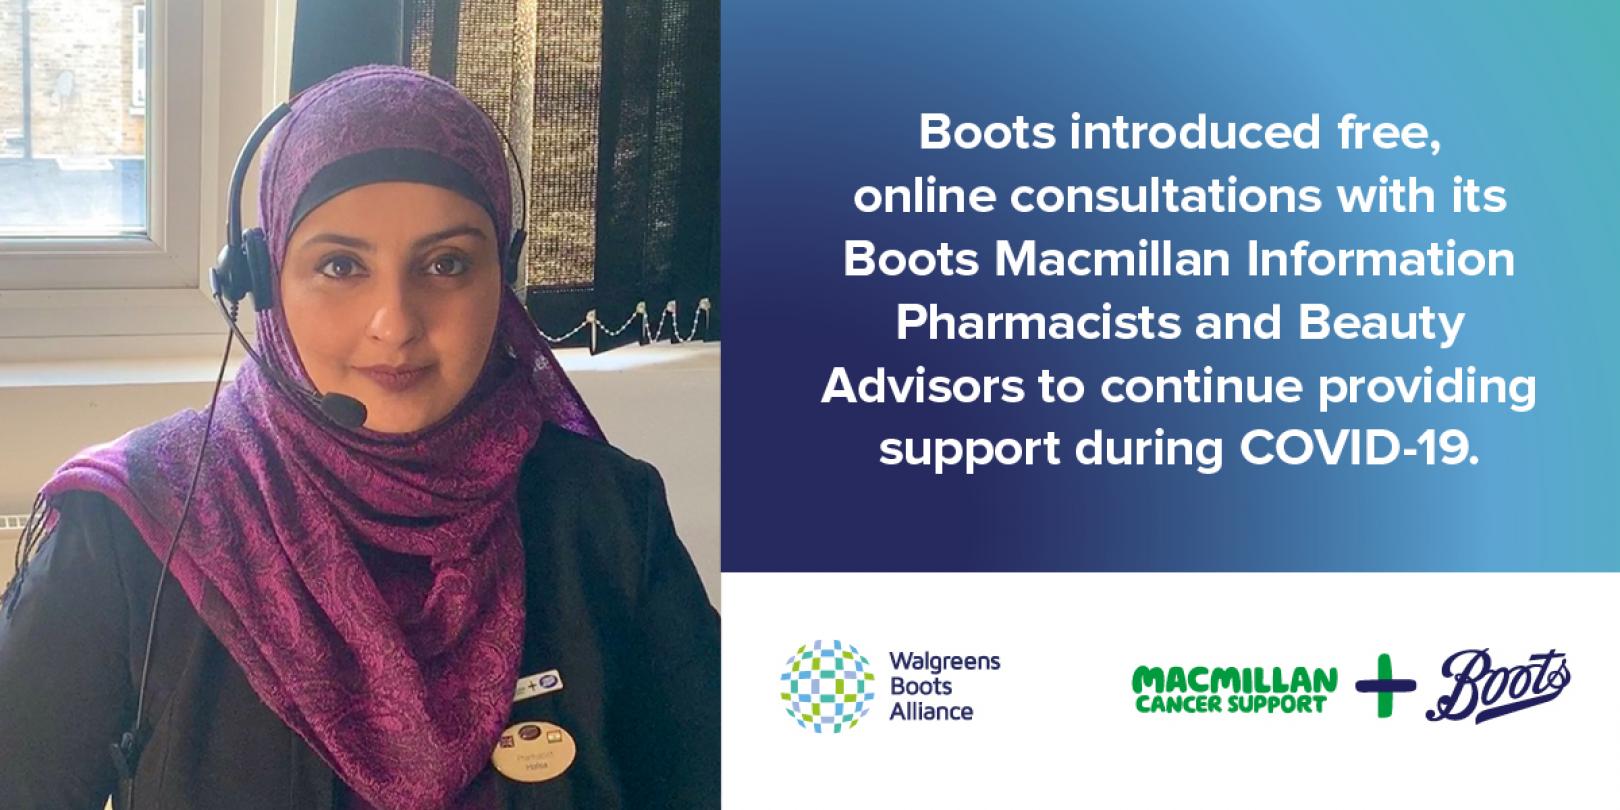 Boots UK & Macmillan Cancer Support launch free online consultations during COVID-19 Twitter LinkedIn